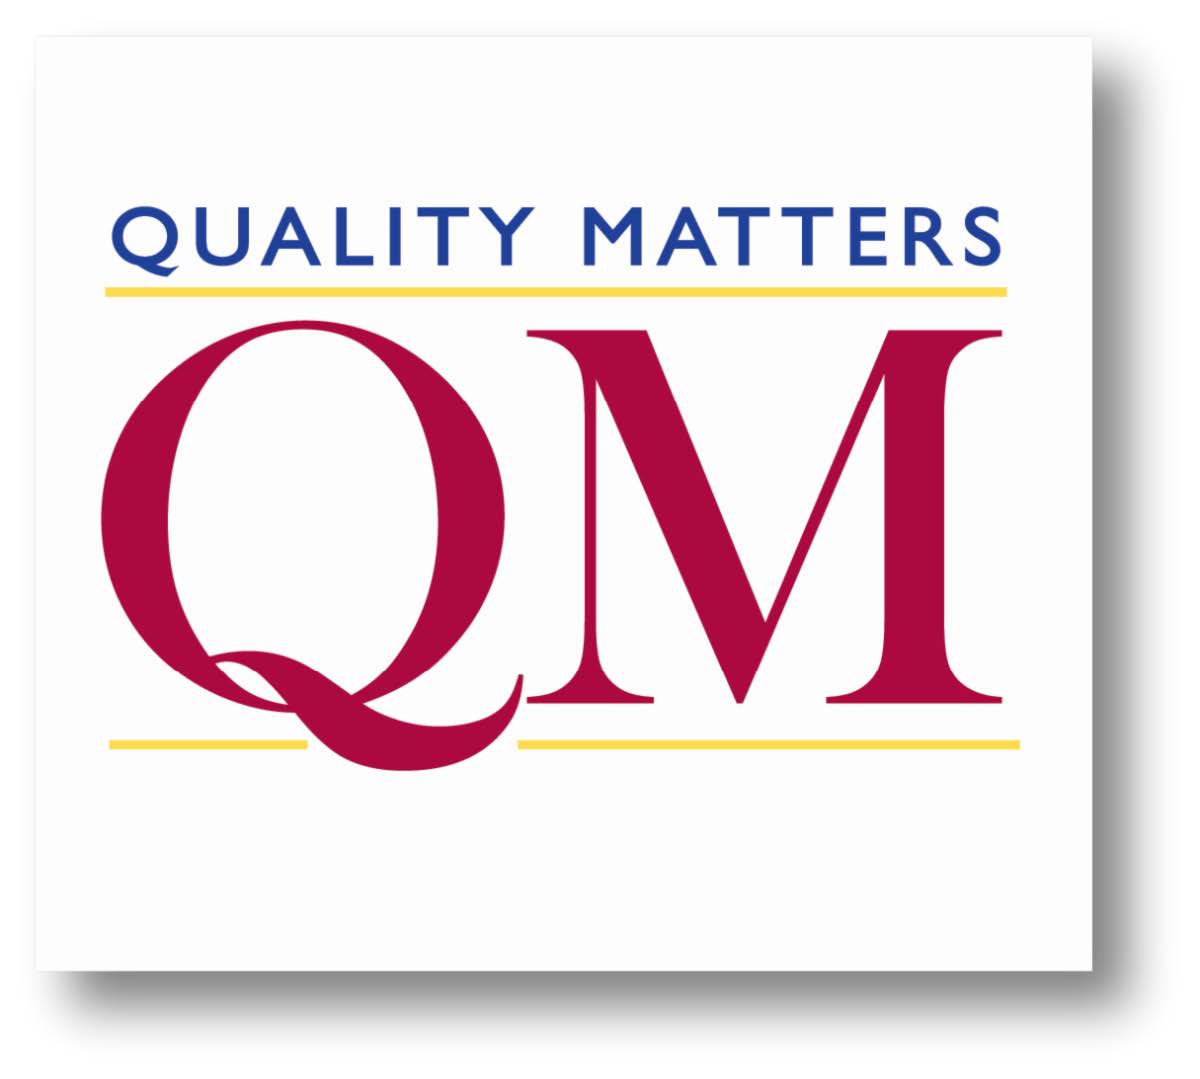 The Quality Matters logo composed of the the words Quality Matters in small, blue, capitalized san-serif font above a yellow horizontal line. The captialized letters Q and M are in red serif font centered on the logo between the two yellow horizontal lines.